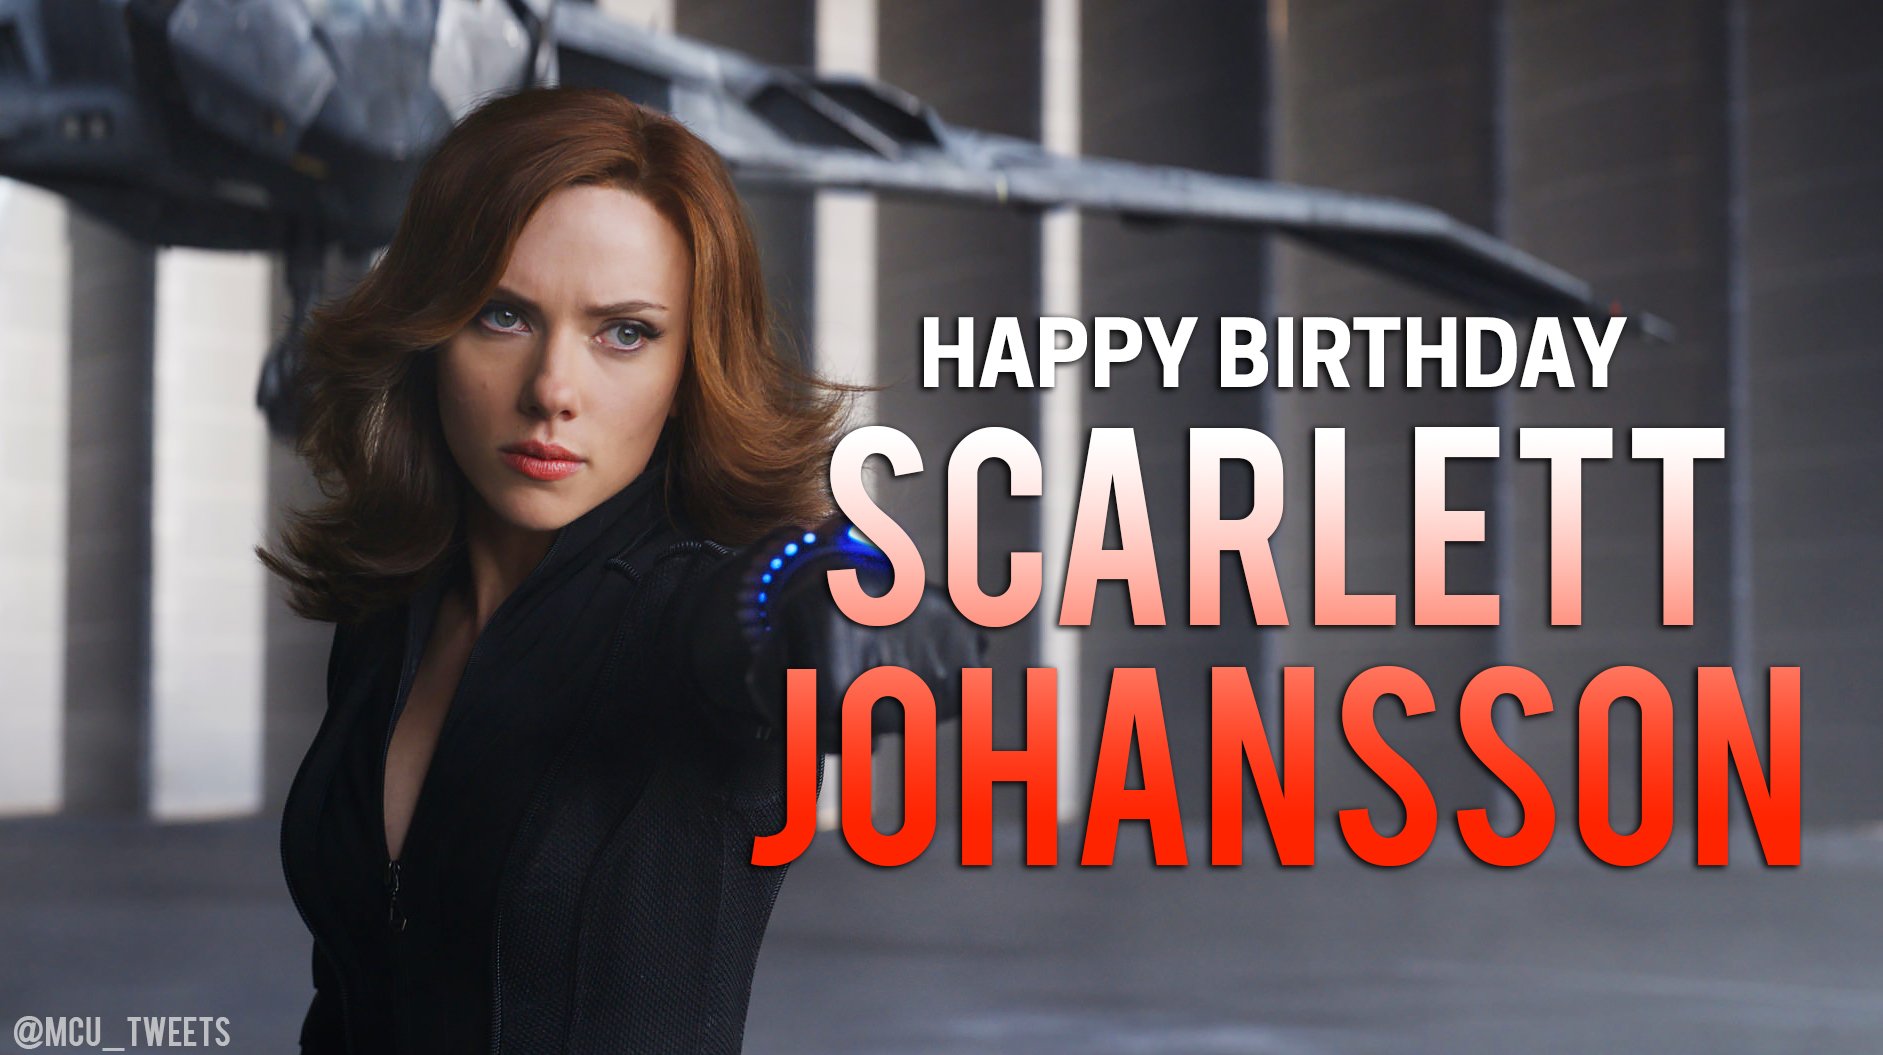 Join us in wishing the Black Widow of the MCU, Scarlett Johansson, a very happy 33rd birthday! 